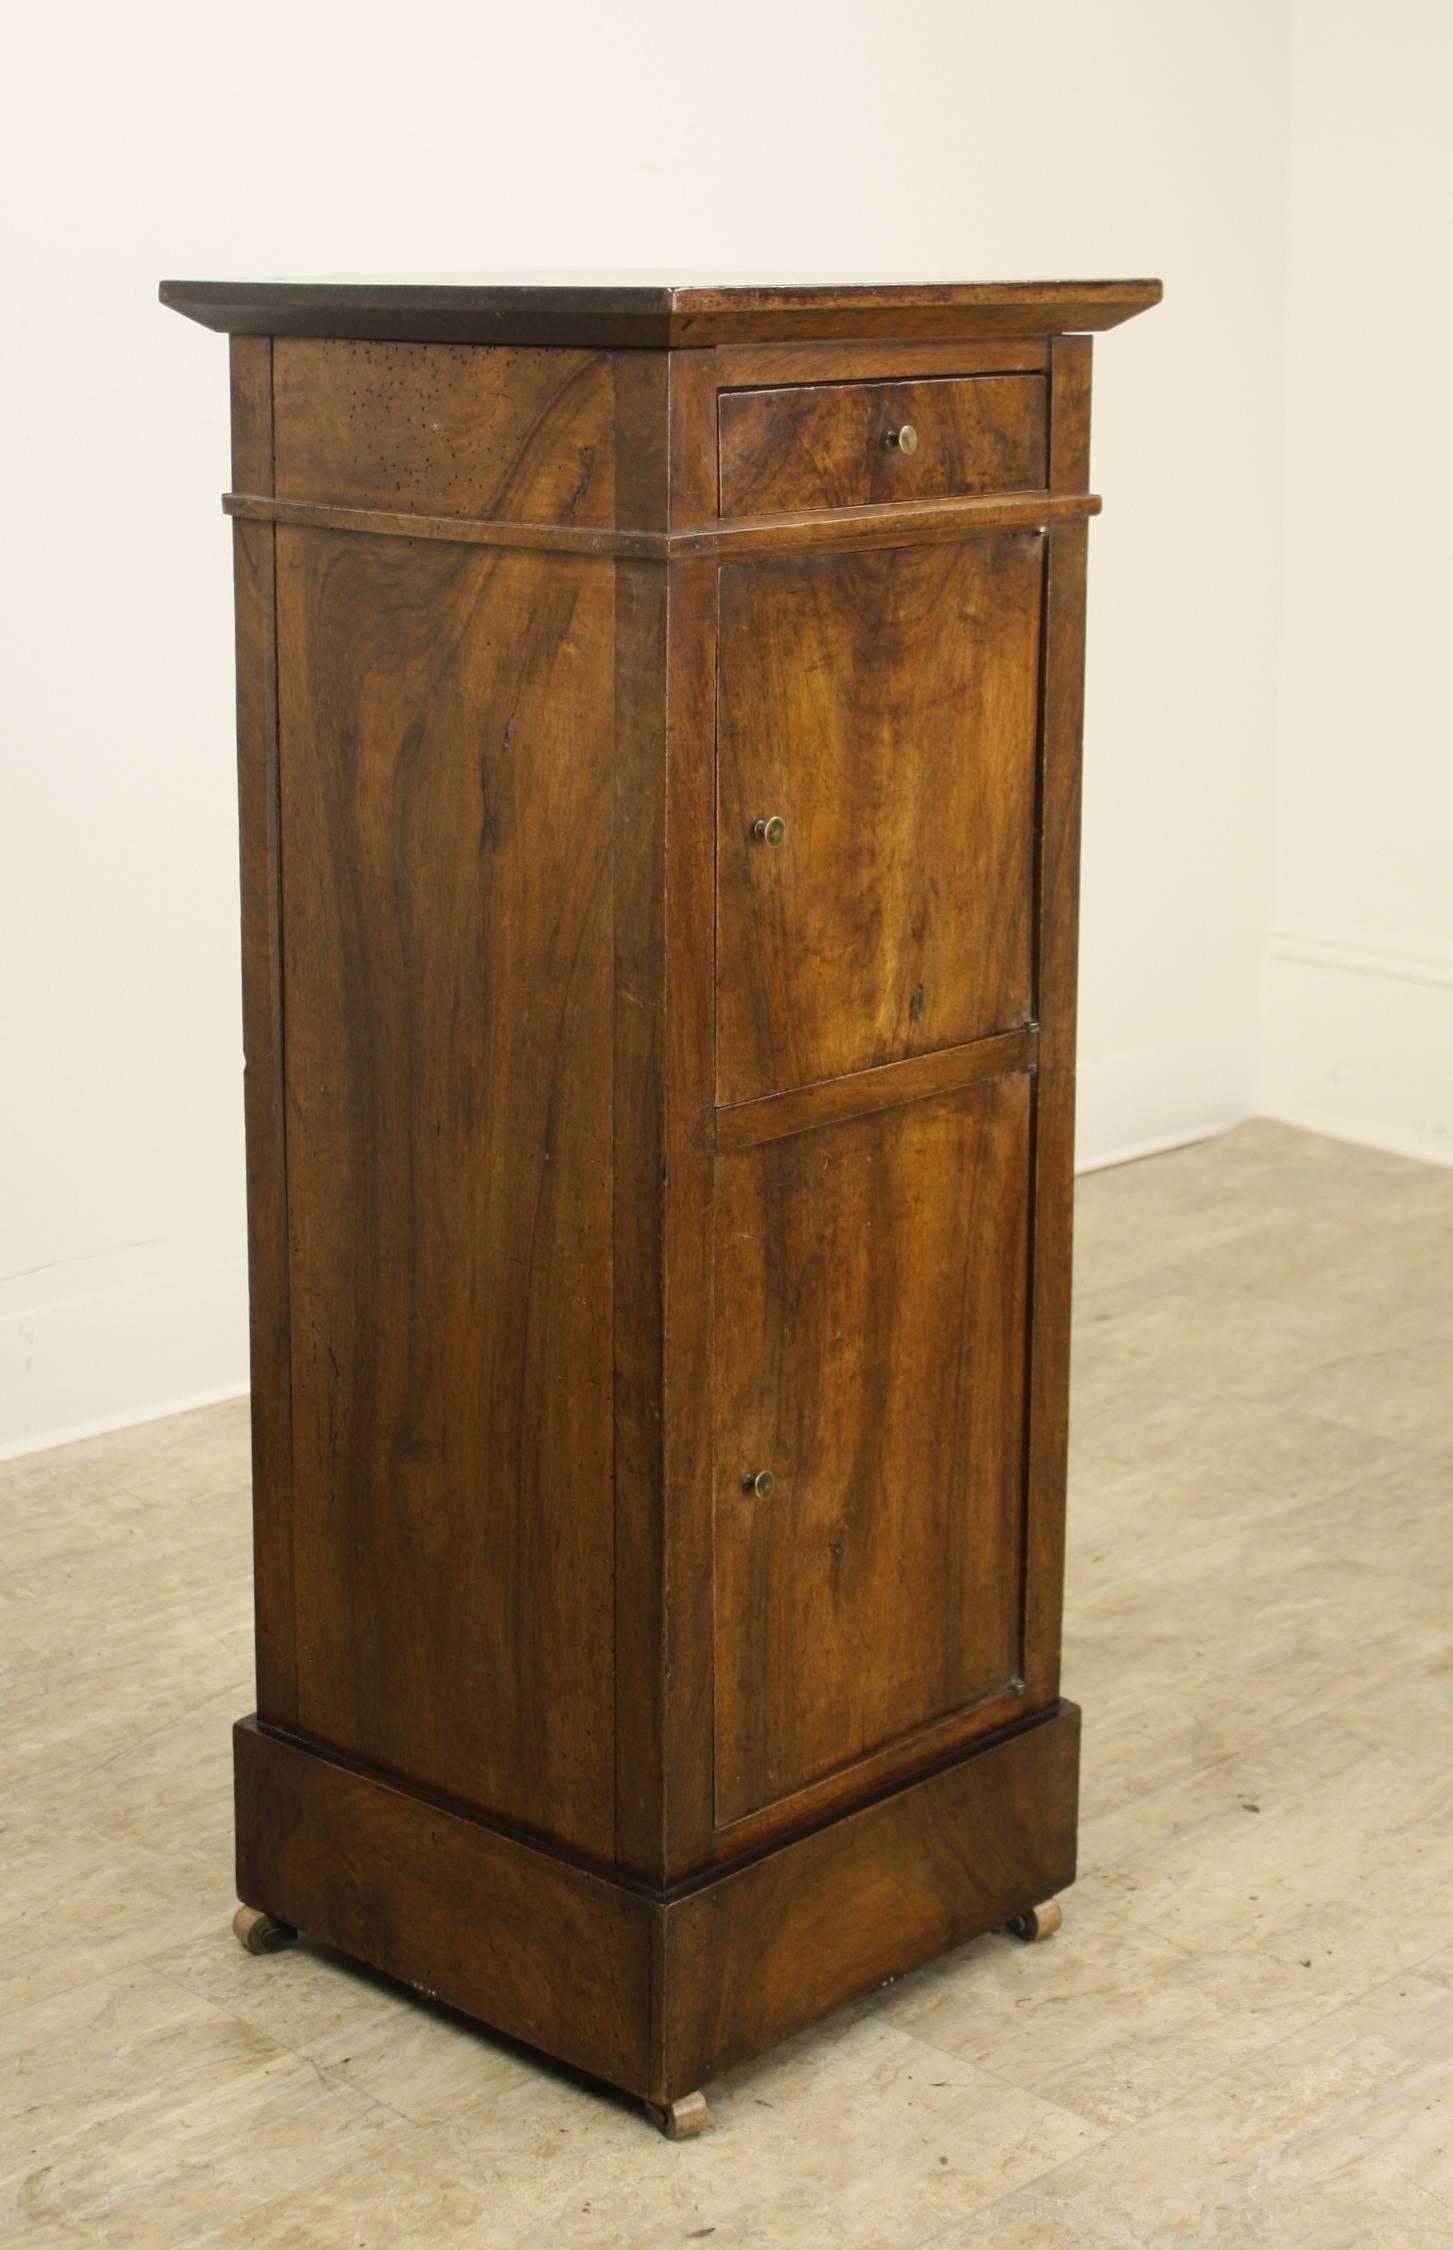 French Small Antique Walnut Cupboard with Wooden Castors